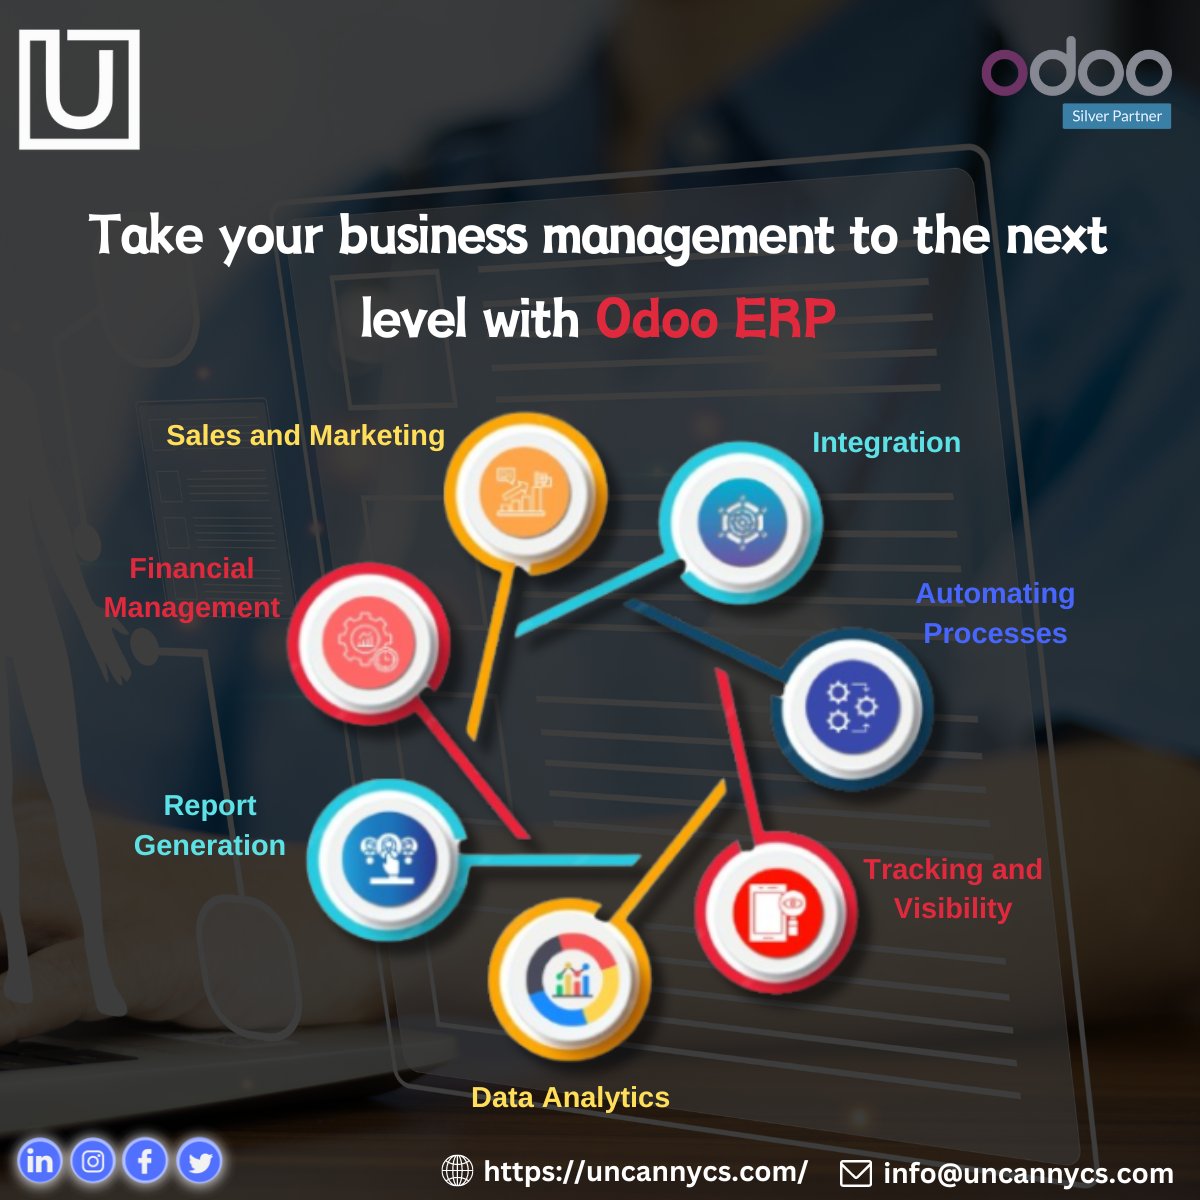 Want to take your business management a notch higher? Switch to Odoo ERP system.

With Odoo, you can deliver seamless processes and get data-driven insights for unparalleled efficiency.

🔗 uncannycs.com/odoo-erp/

#Uncannycs #odoo #odooerp #businessmanagement #Efficiency